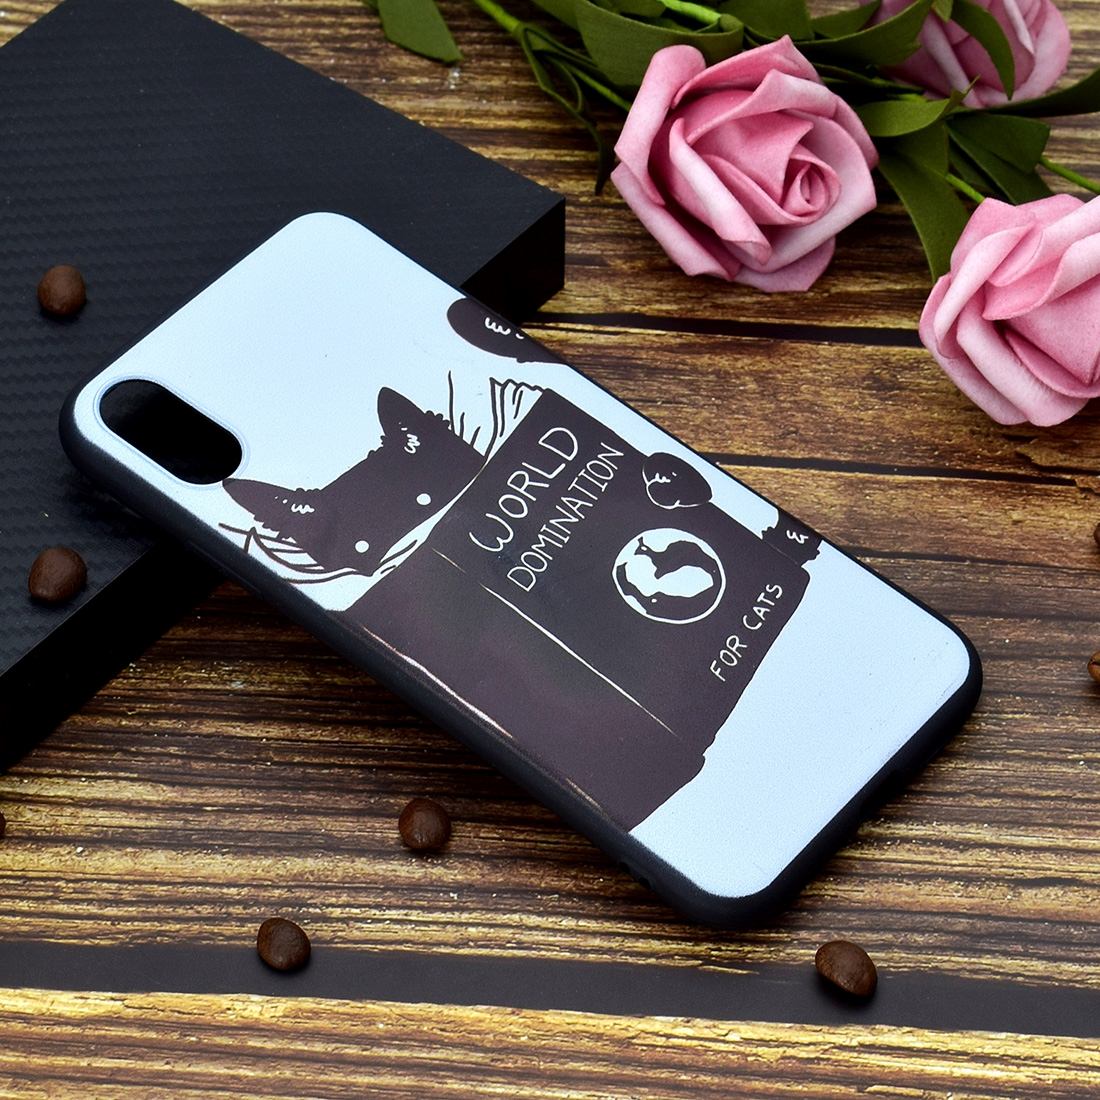 Painted Soft TPU Protective Case For iPhone XR,Black Cat